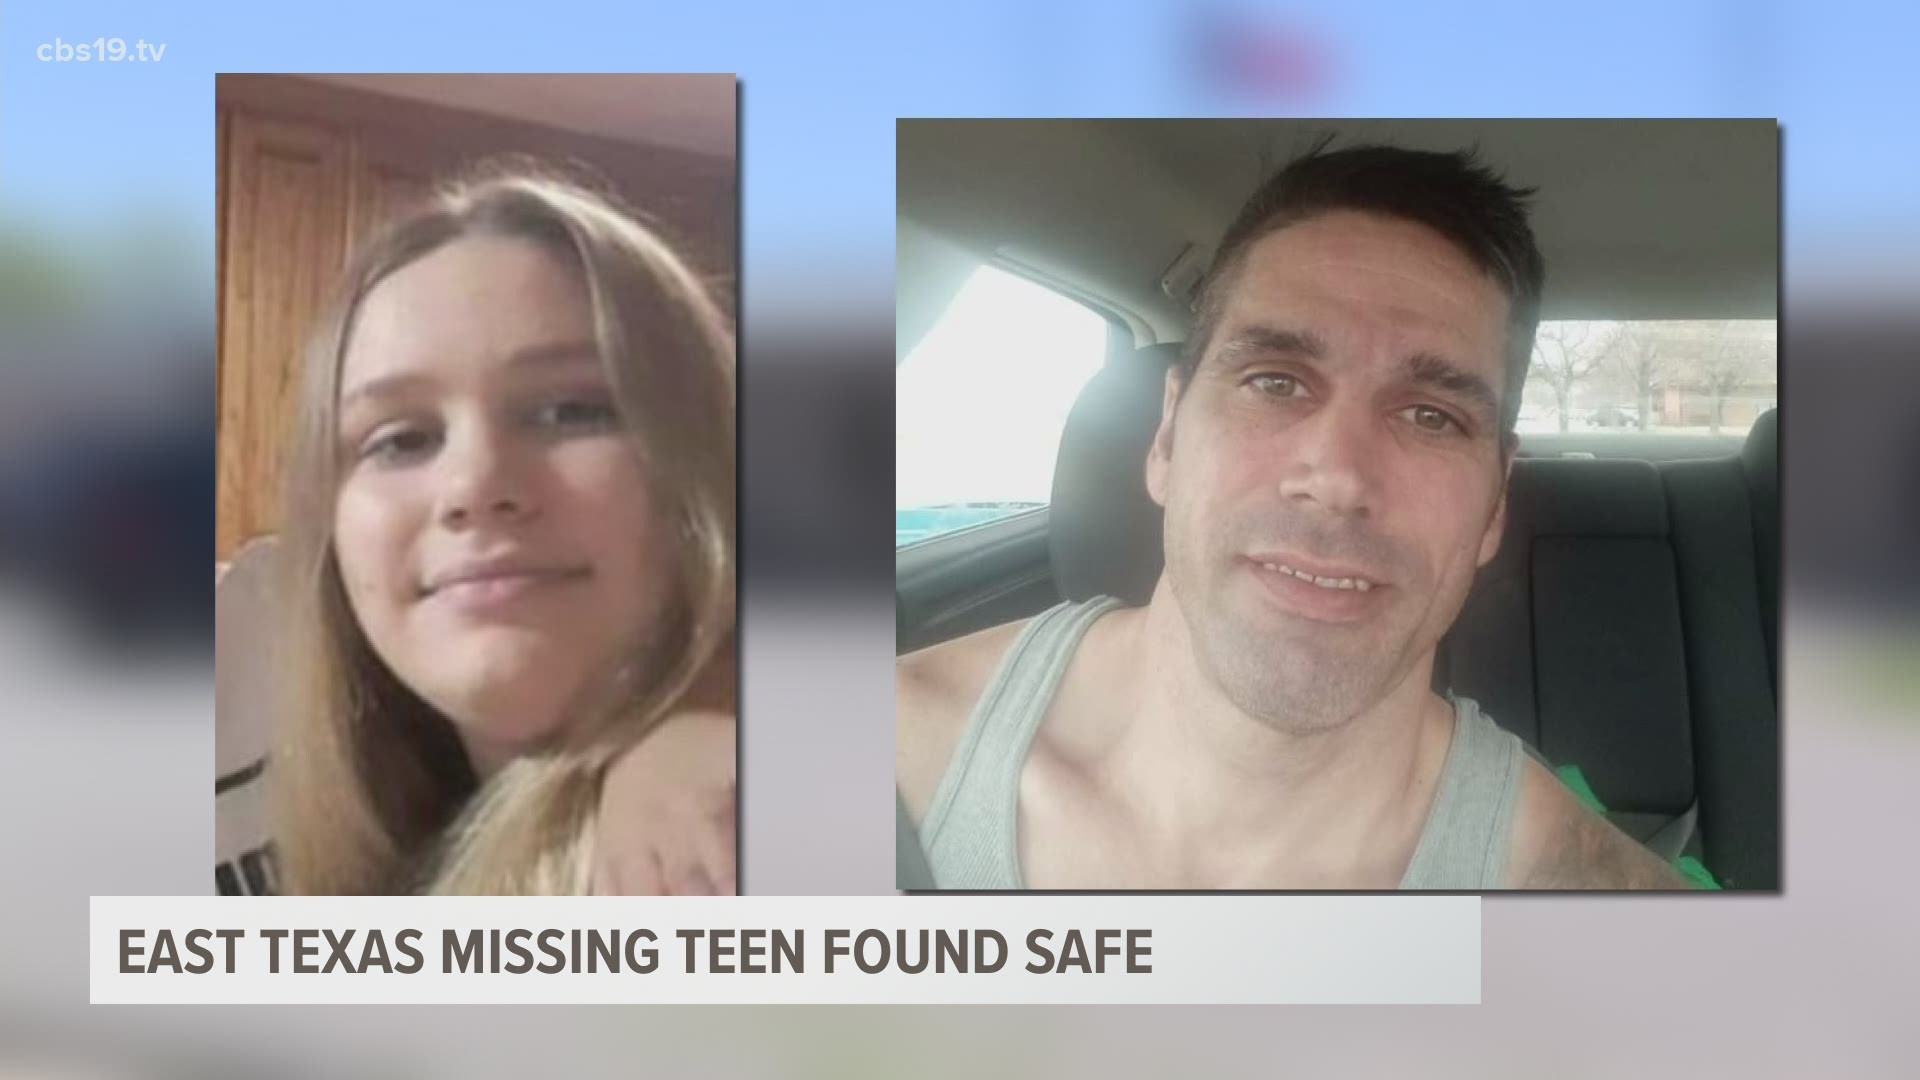 The Rains County Sheriff's Office says an East Texas teen who was abducted by her non-custodial father has been found safe.